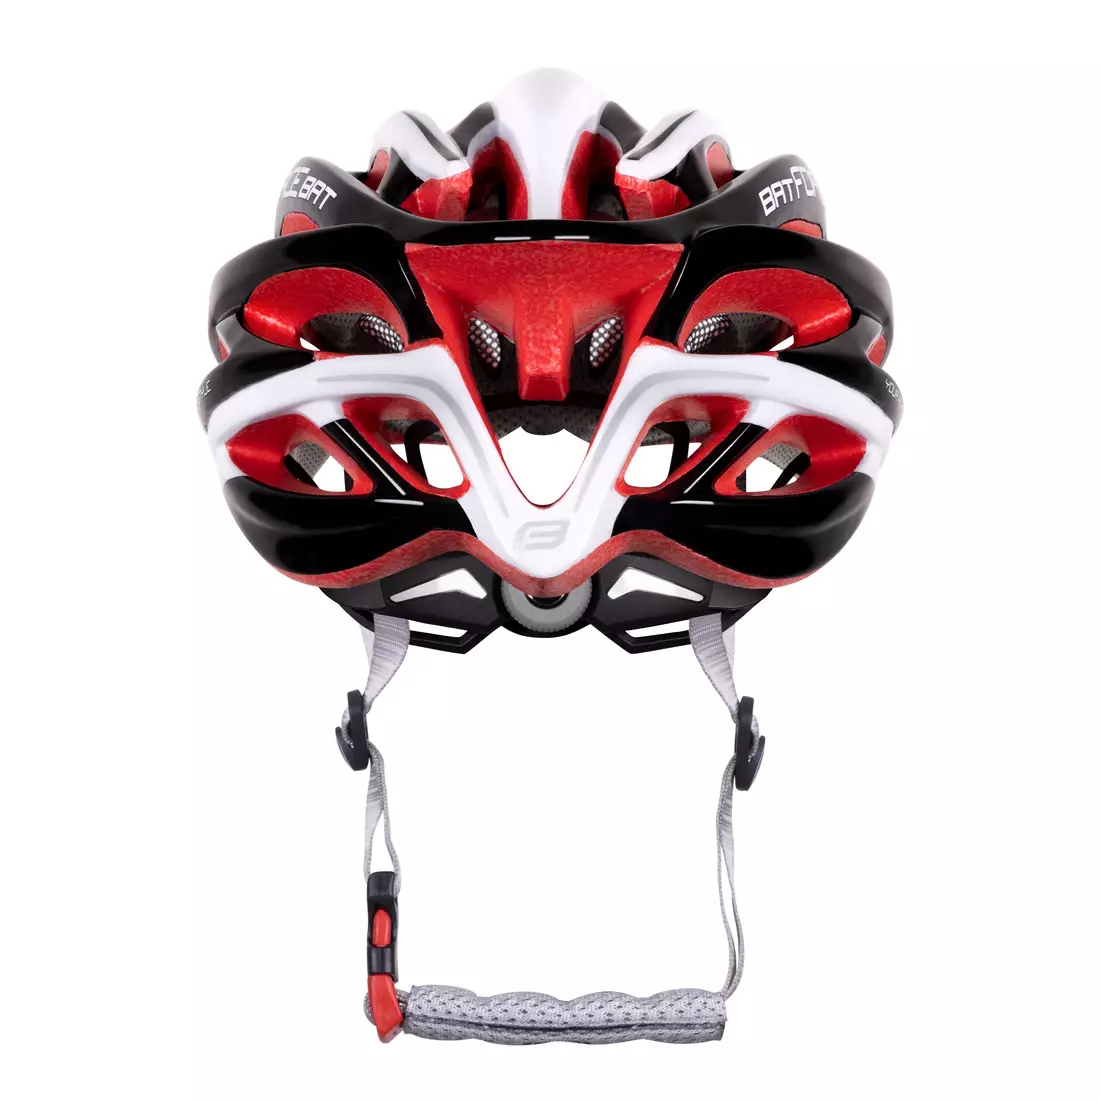 FORCE Bicycle helmet BAT White and red 902952